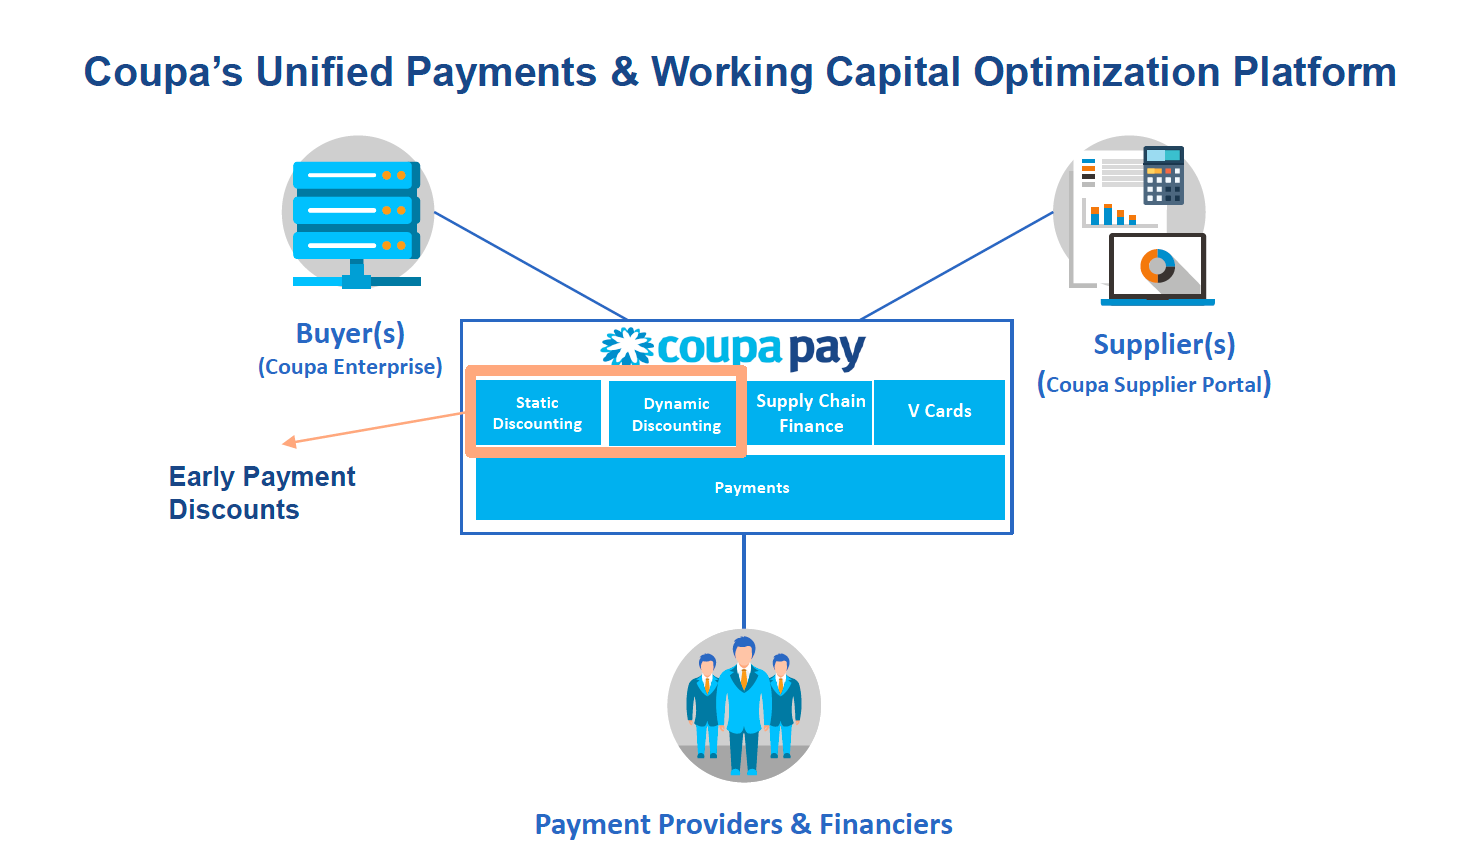 Coupa's Unified Payments & Working Capital Optimization Platform